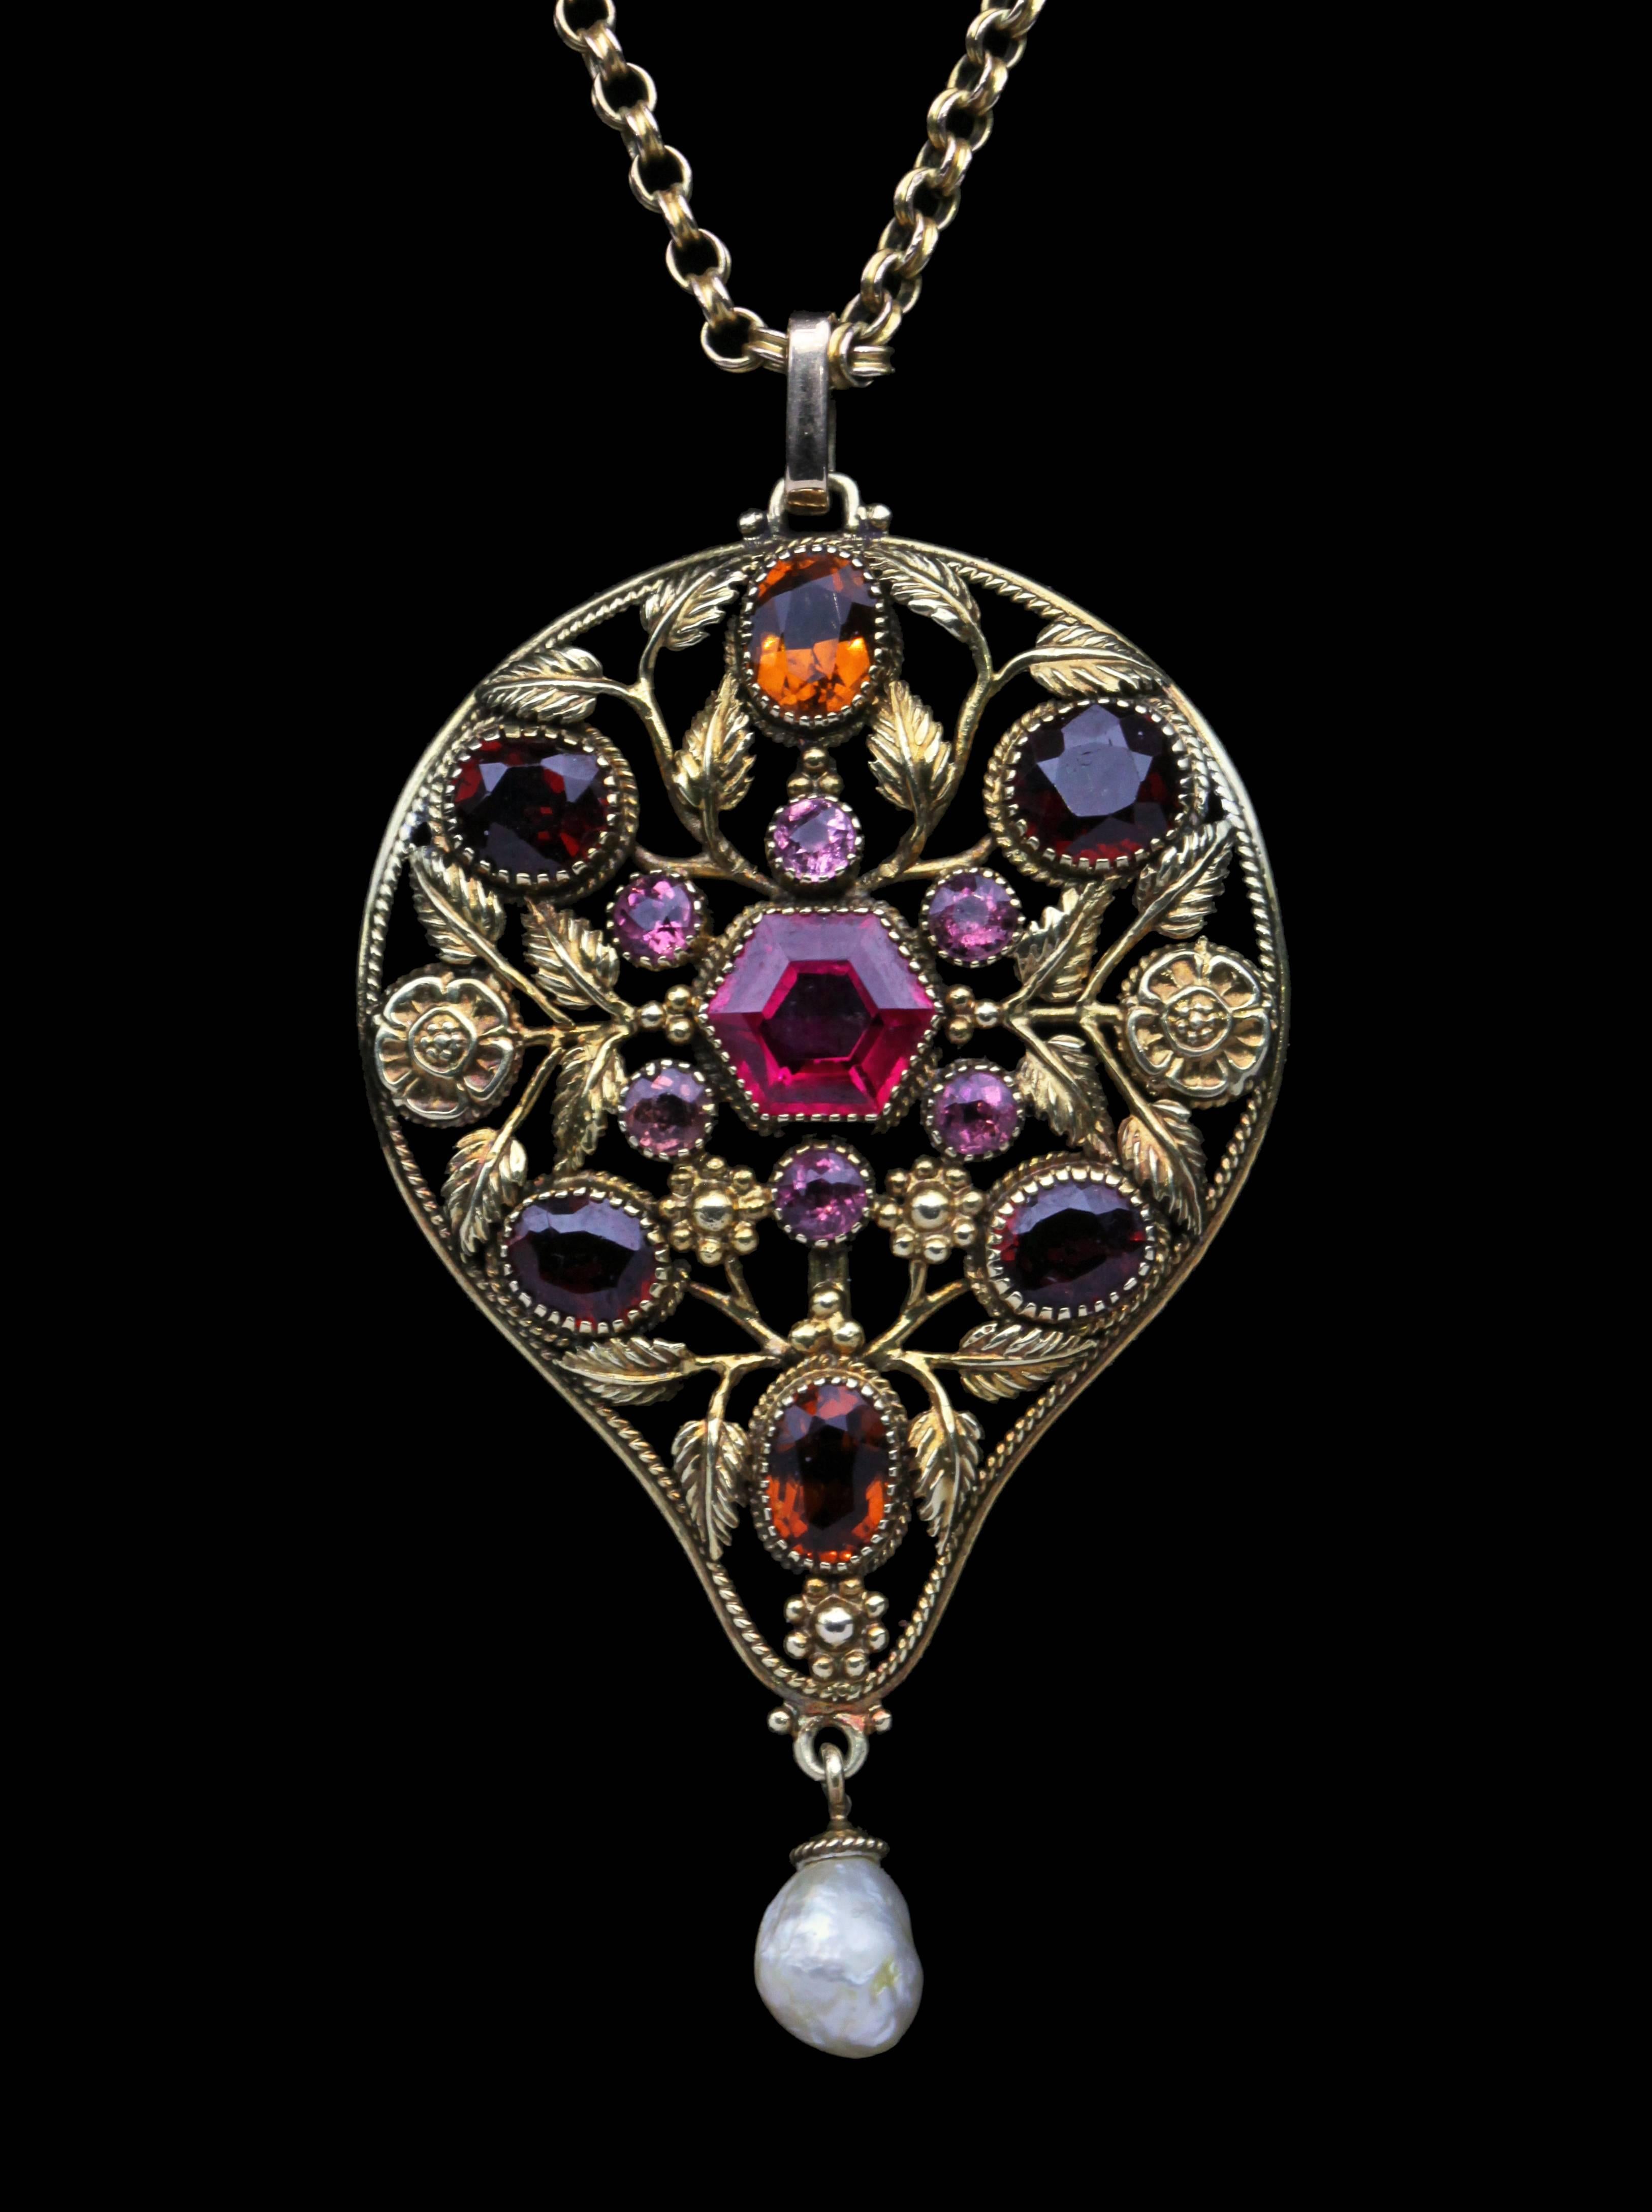 The design of this beautiful rose pendant, symbolic of love, is attributed to Edward Spencer.
The Tudor rose is the traditional floral heraldic emblem of England which originates from the Tudor dynasty.
This genuine laboratory ruby has the same